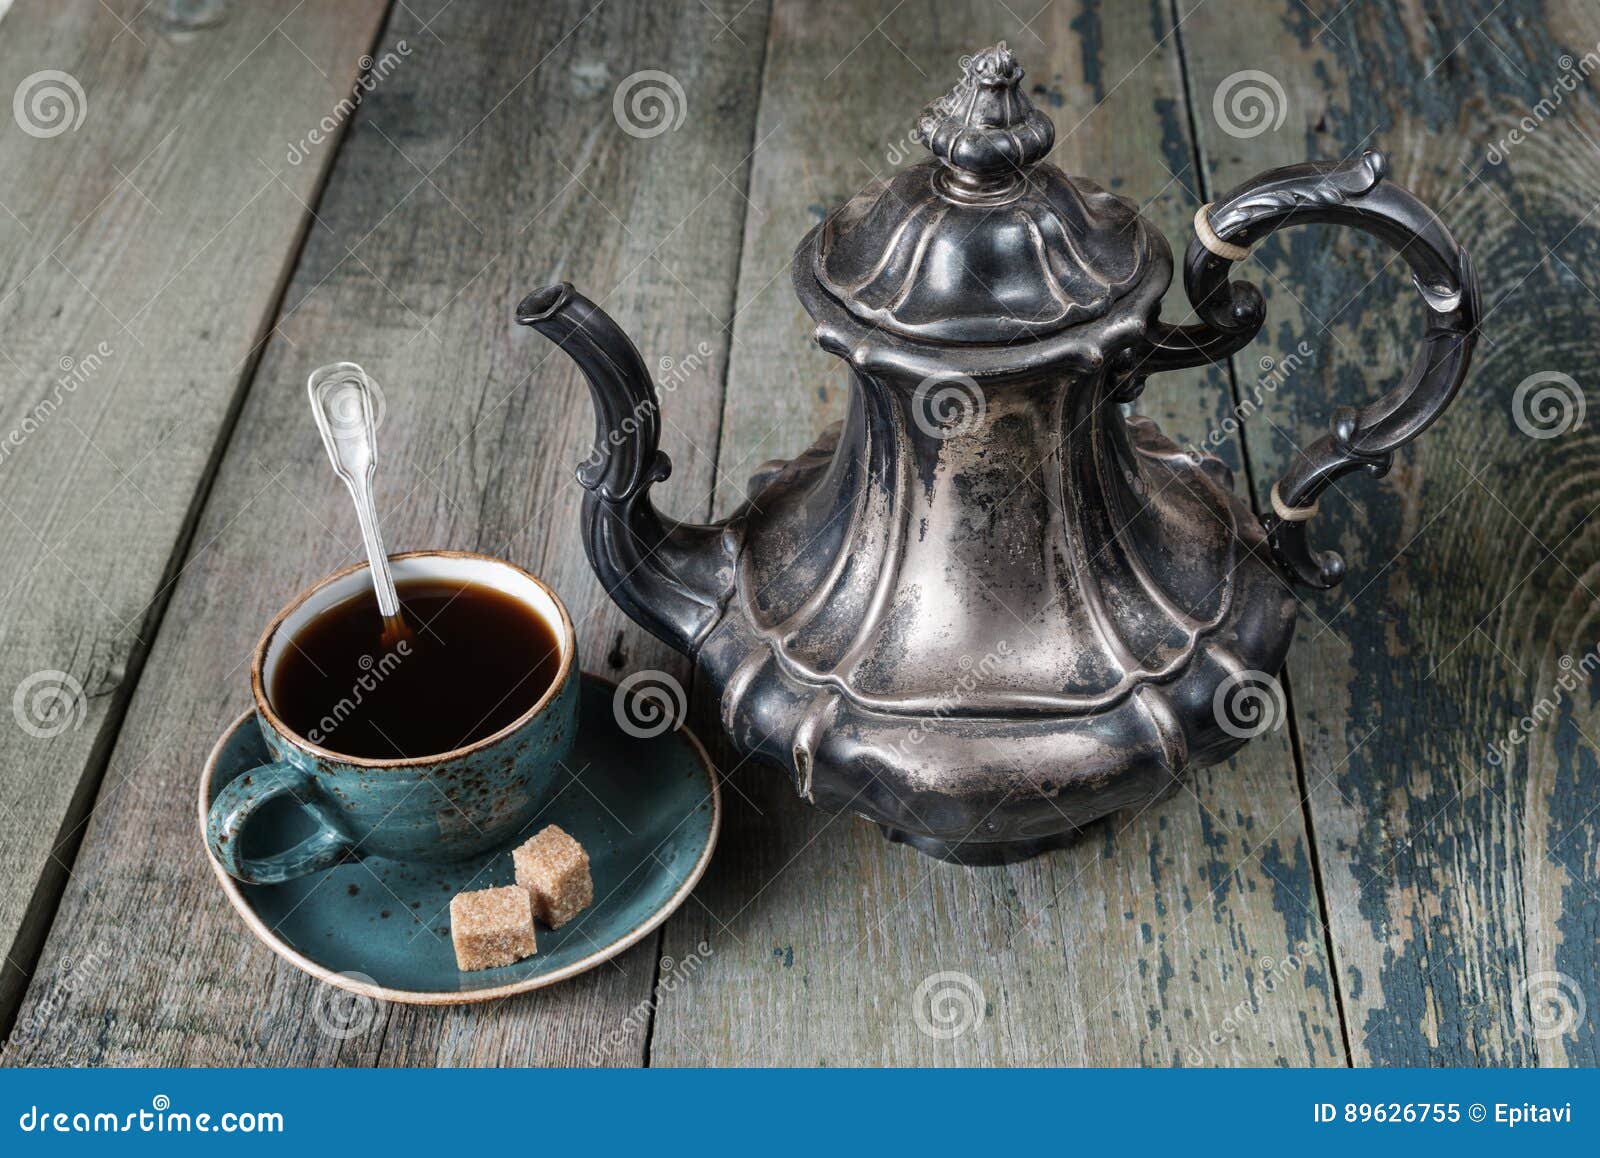 Antique Coffee Pot and Cup of Coffee Stock Image - Image of life, gourmet:  89626755